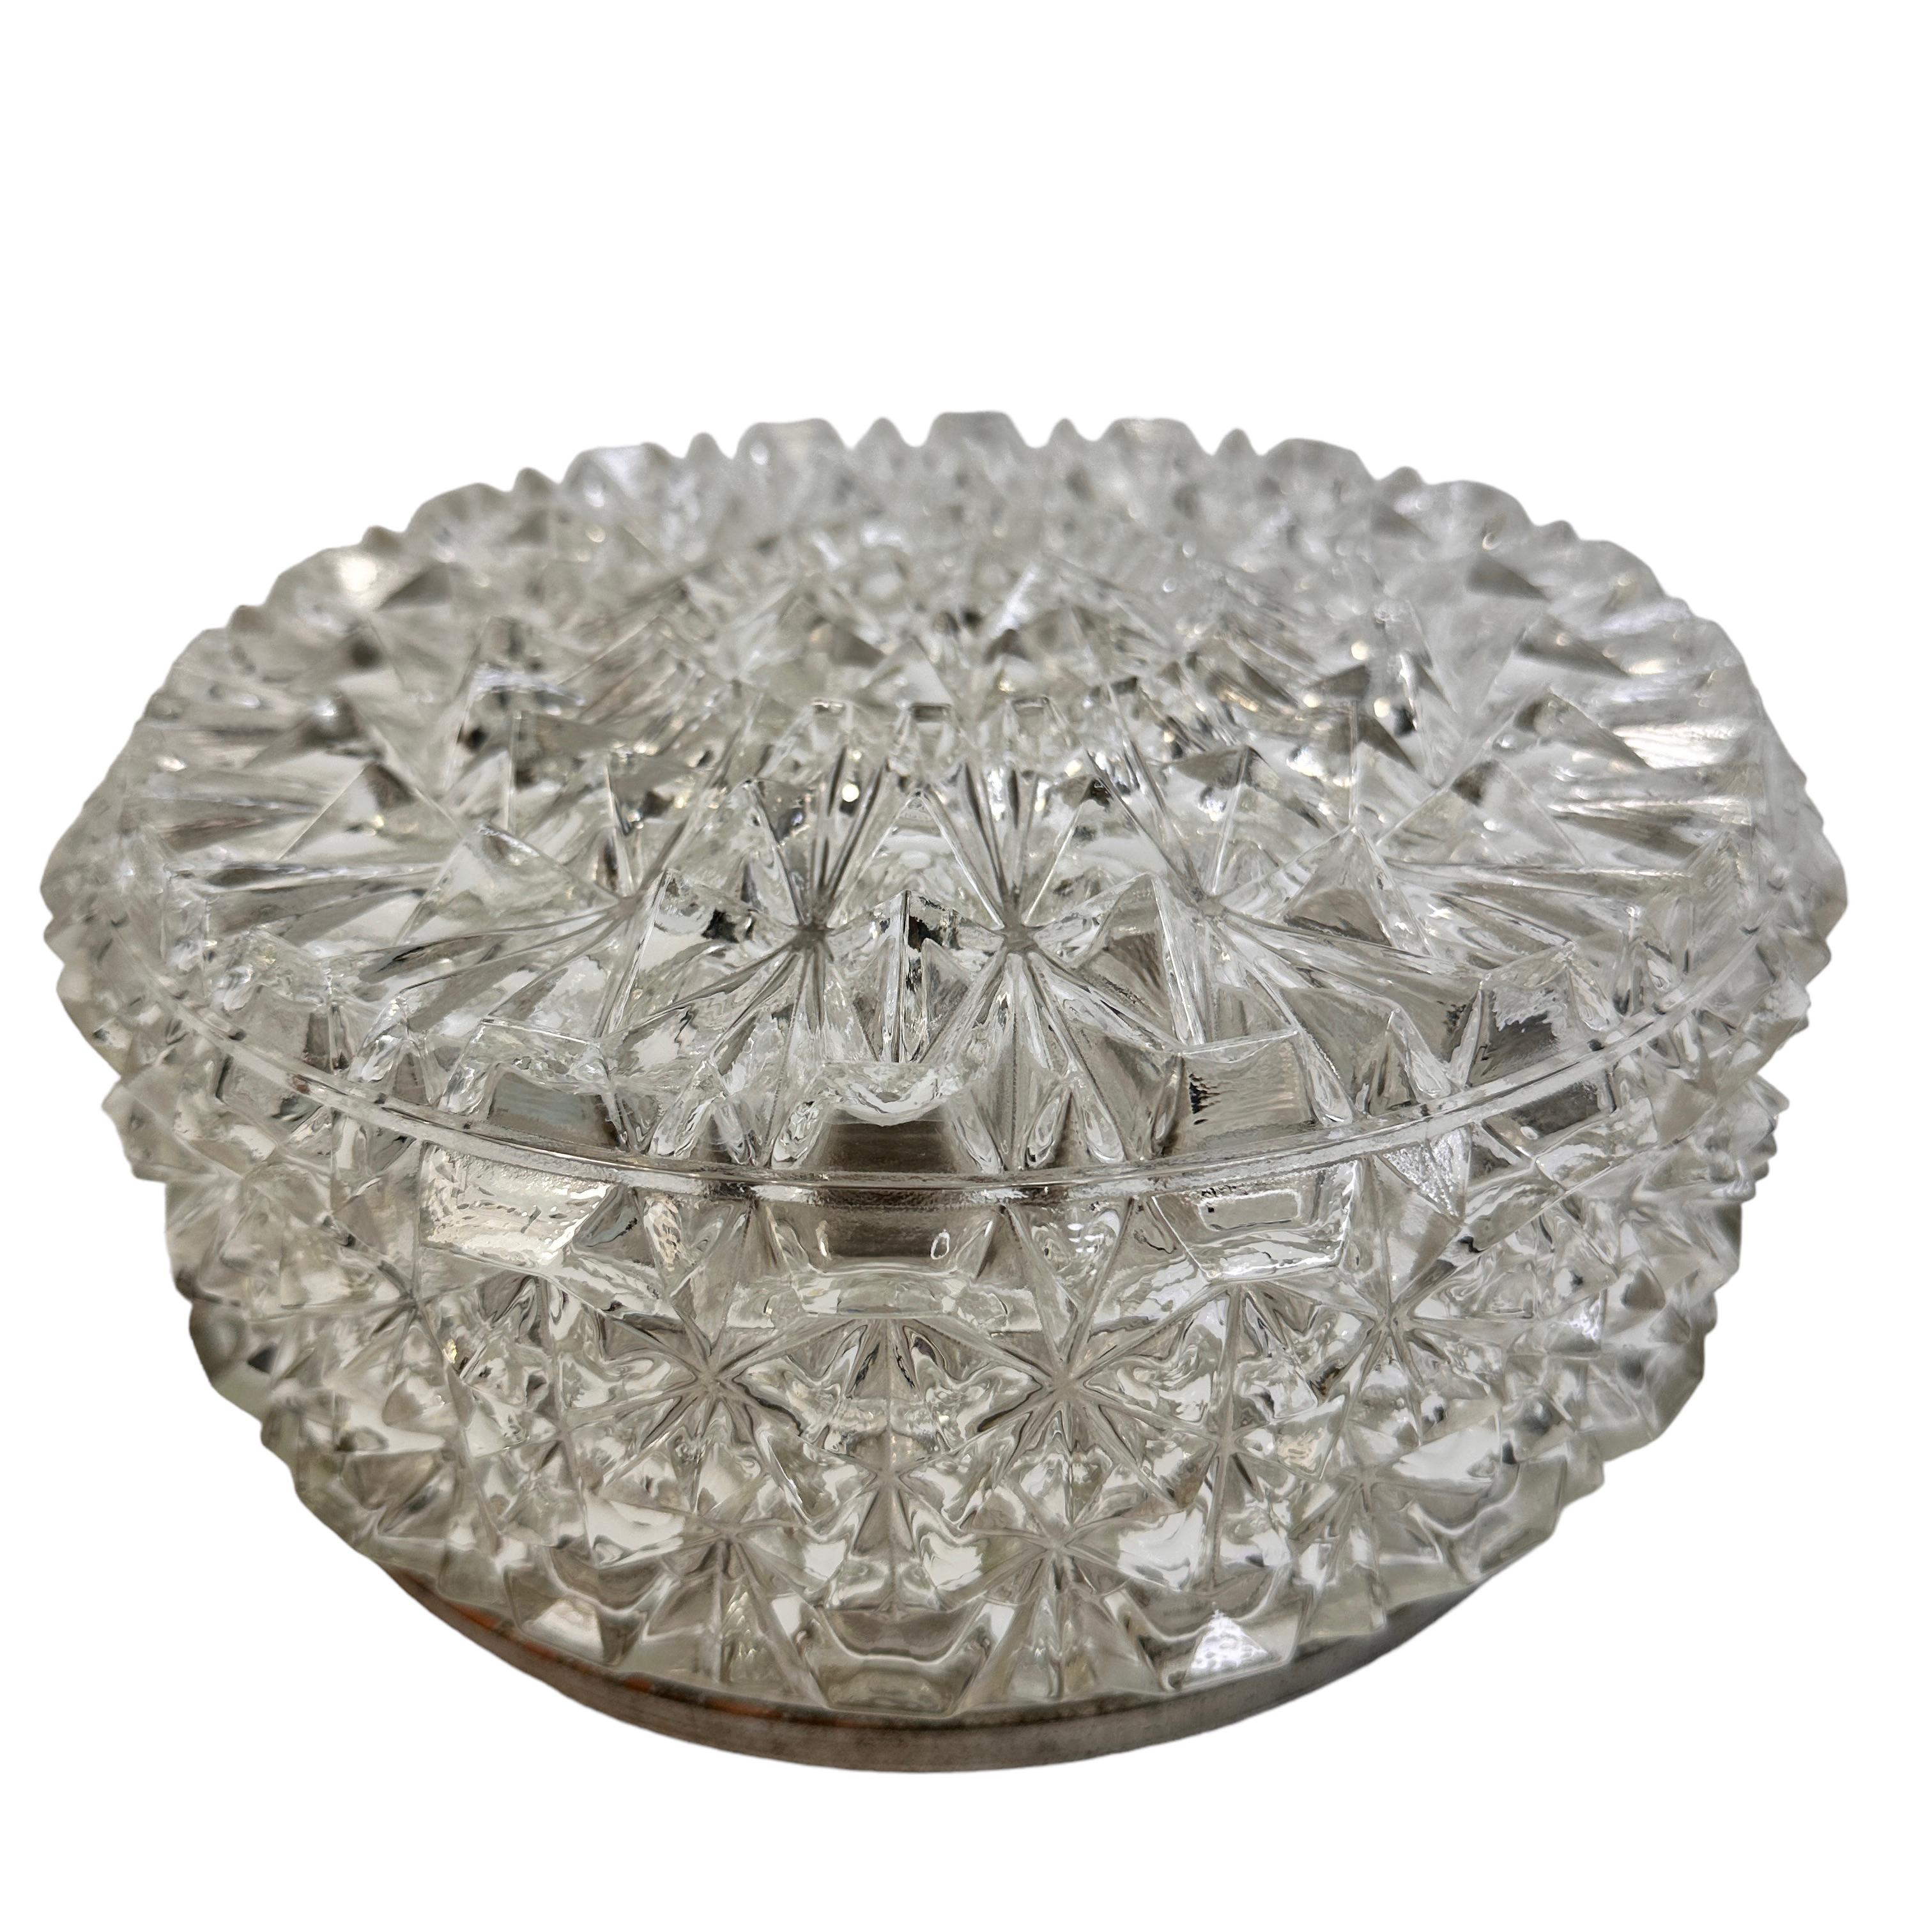 Beautiful ice crystal shape flush mount. Made in Germany in the 1960s. Gorgeous textured glass flush mount with metal fixture. The glass has a very cute design. The fixture requires one European E27 / 110 Volt Edison bulb, up to 100 watts. Found at